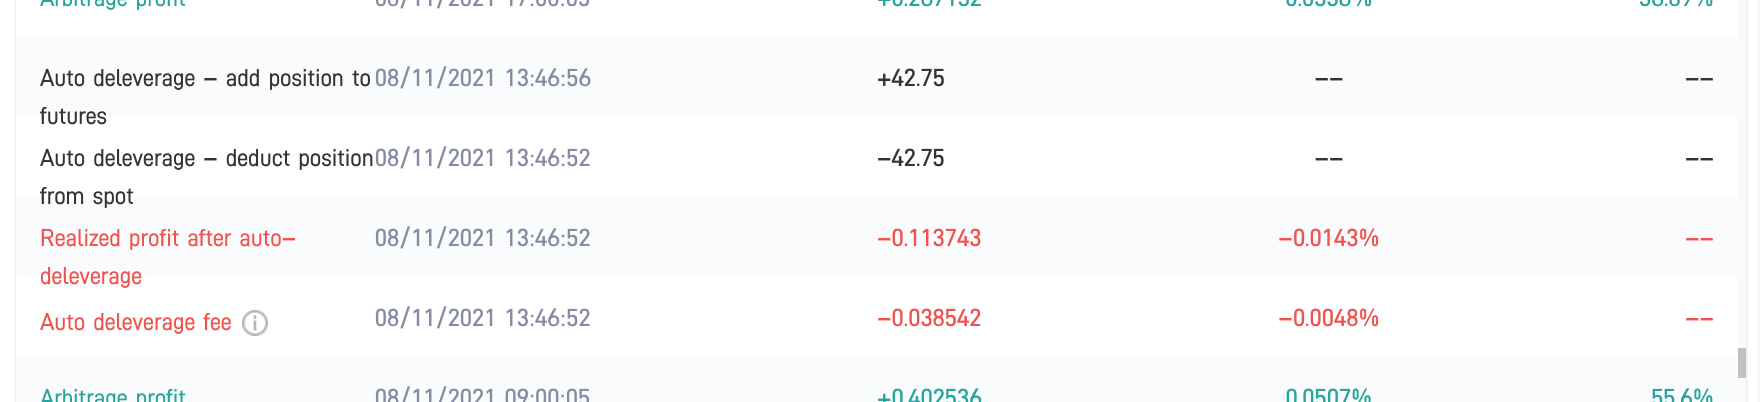 Example of an event where the Pionex arbitrage bot ensures that the loans for the levers used are covered. It can be seen that an «Auto deleverage fee» of 0.0048% is incurred. In addition, $42.75 is shifted from the spot investment to the futures position to cover the credit in the futures position.